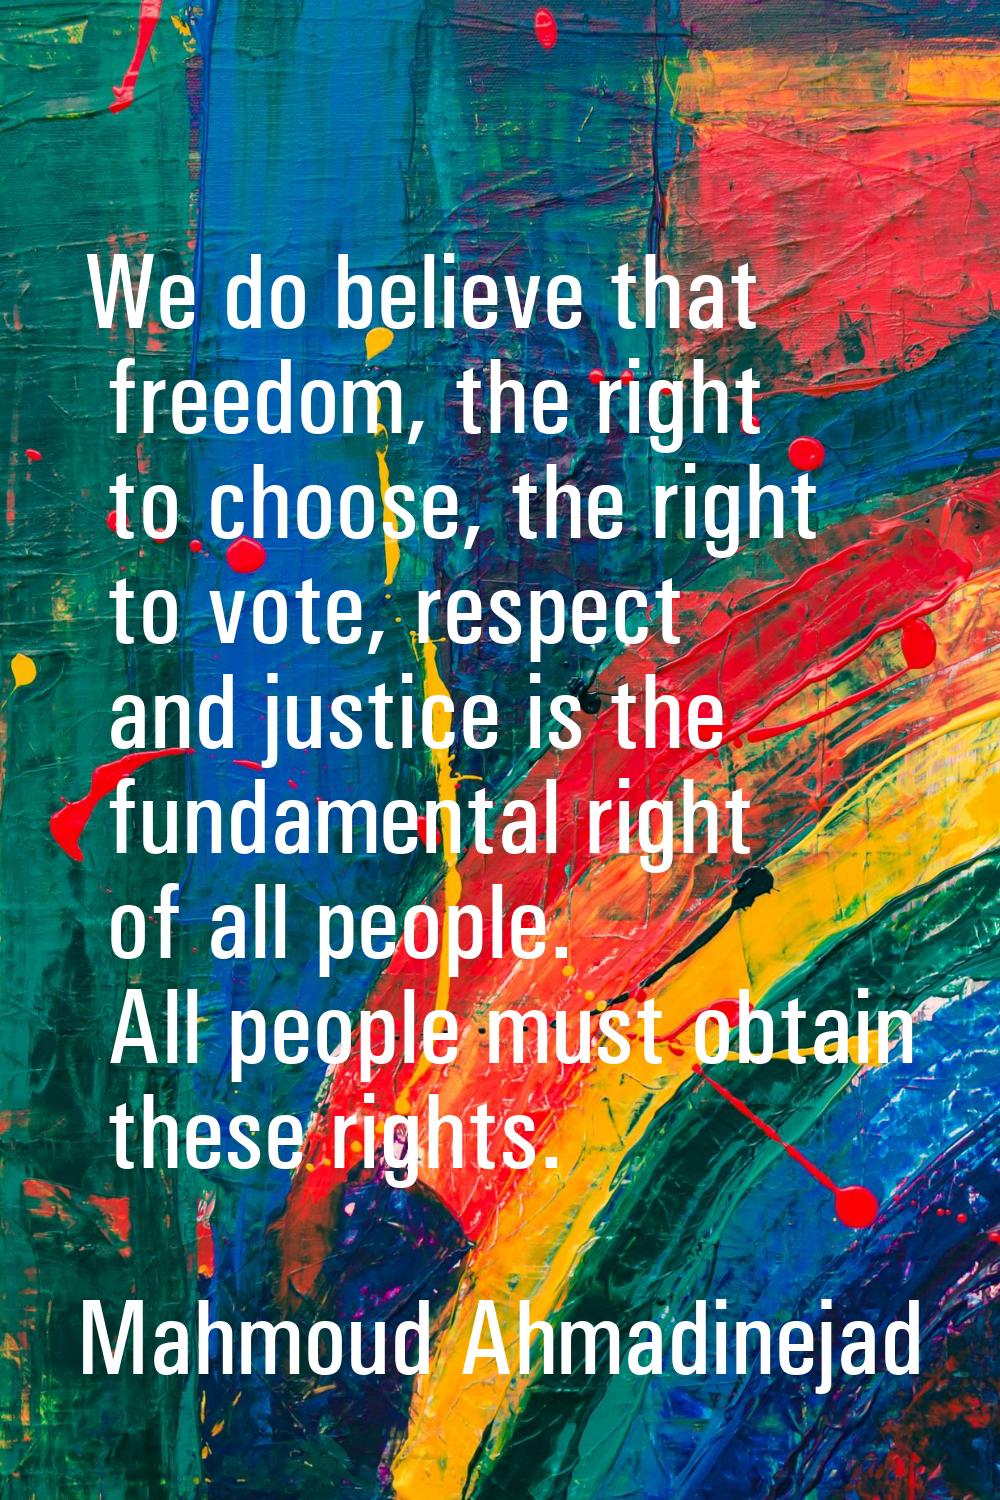 We do believe that freedom, the right to choose, the right to vote, respect and justice is the fund